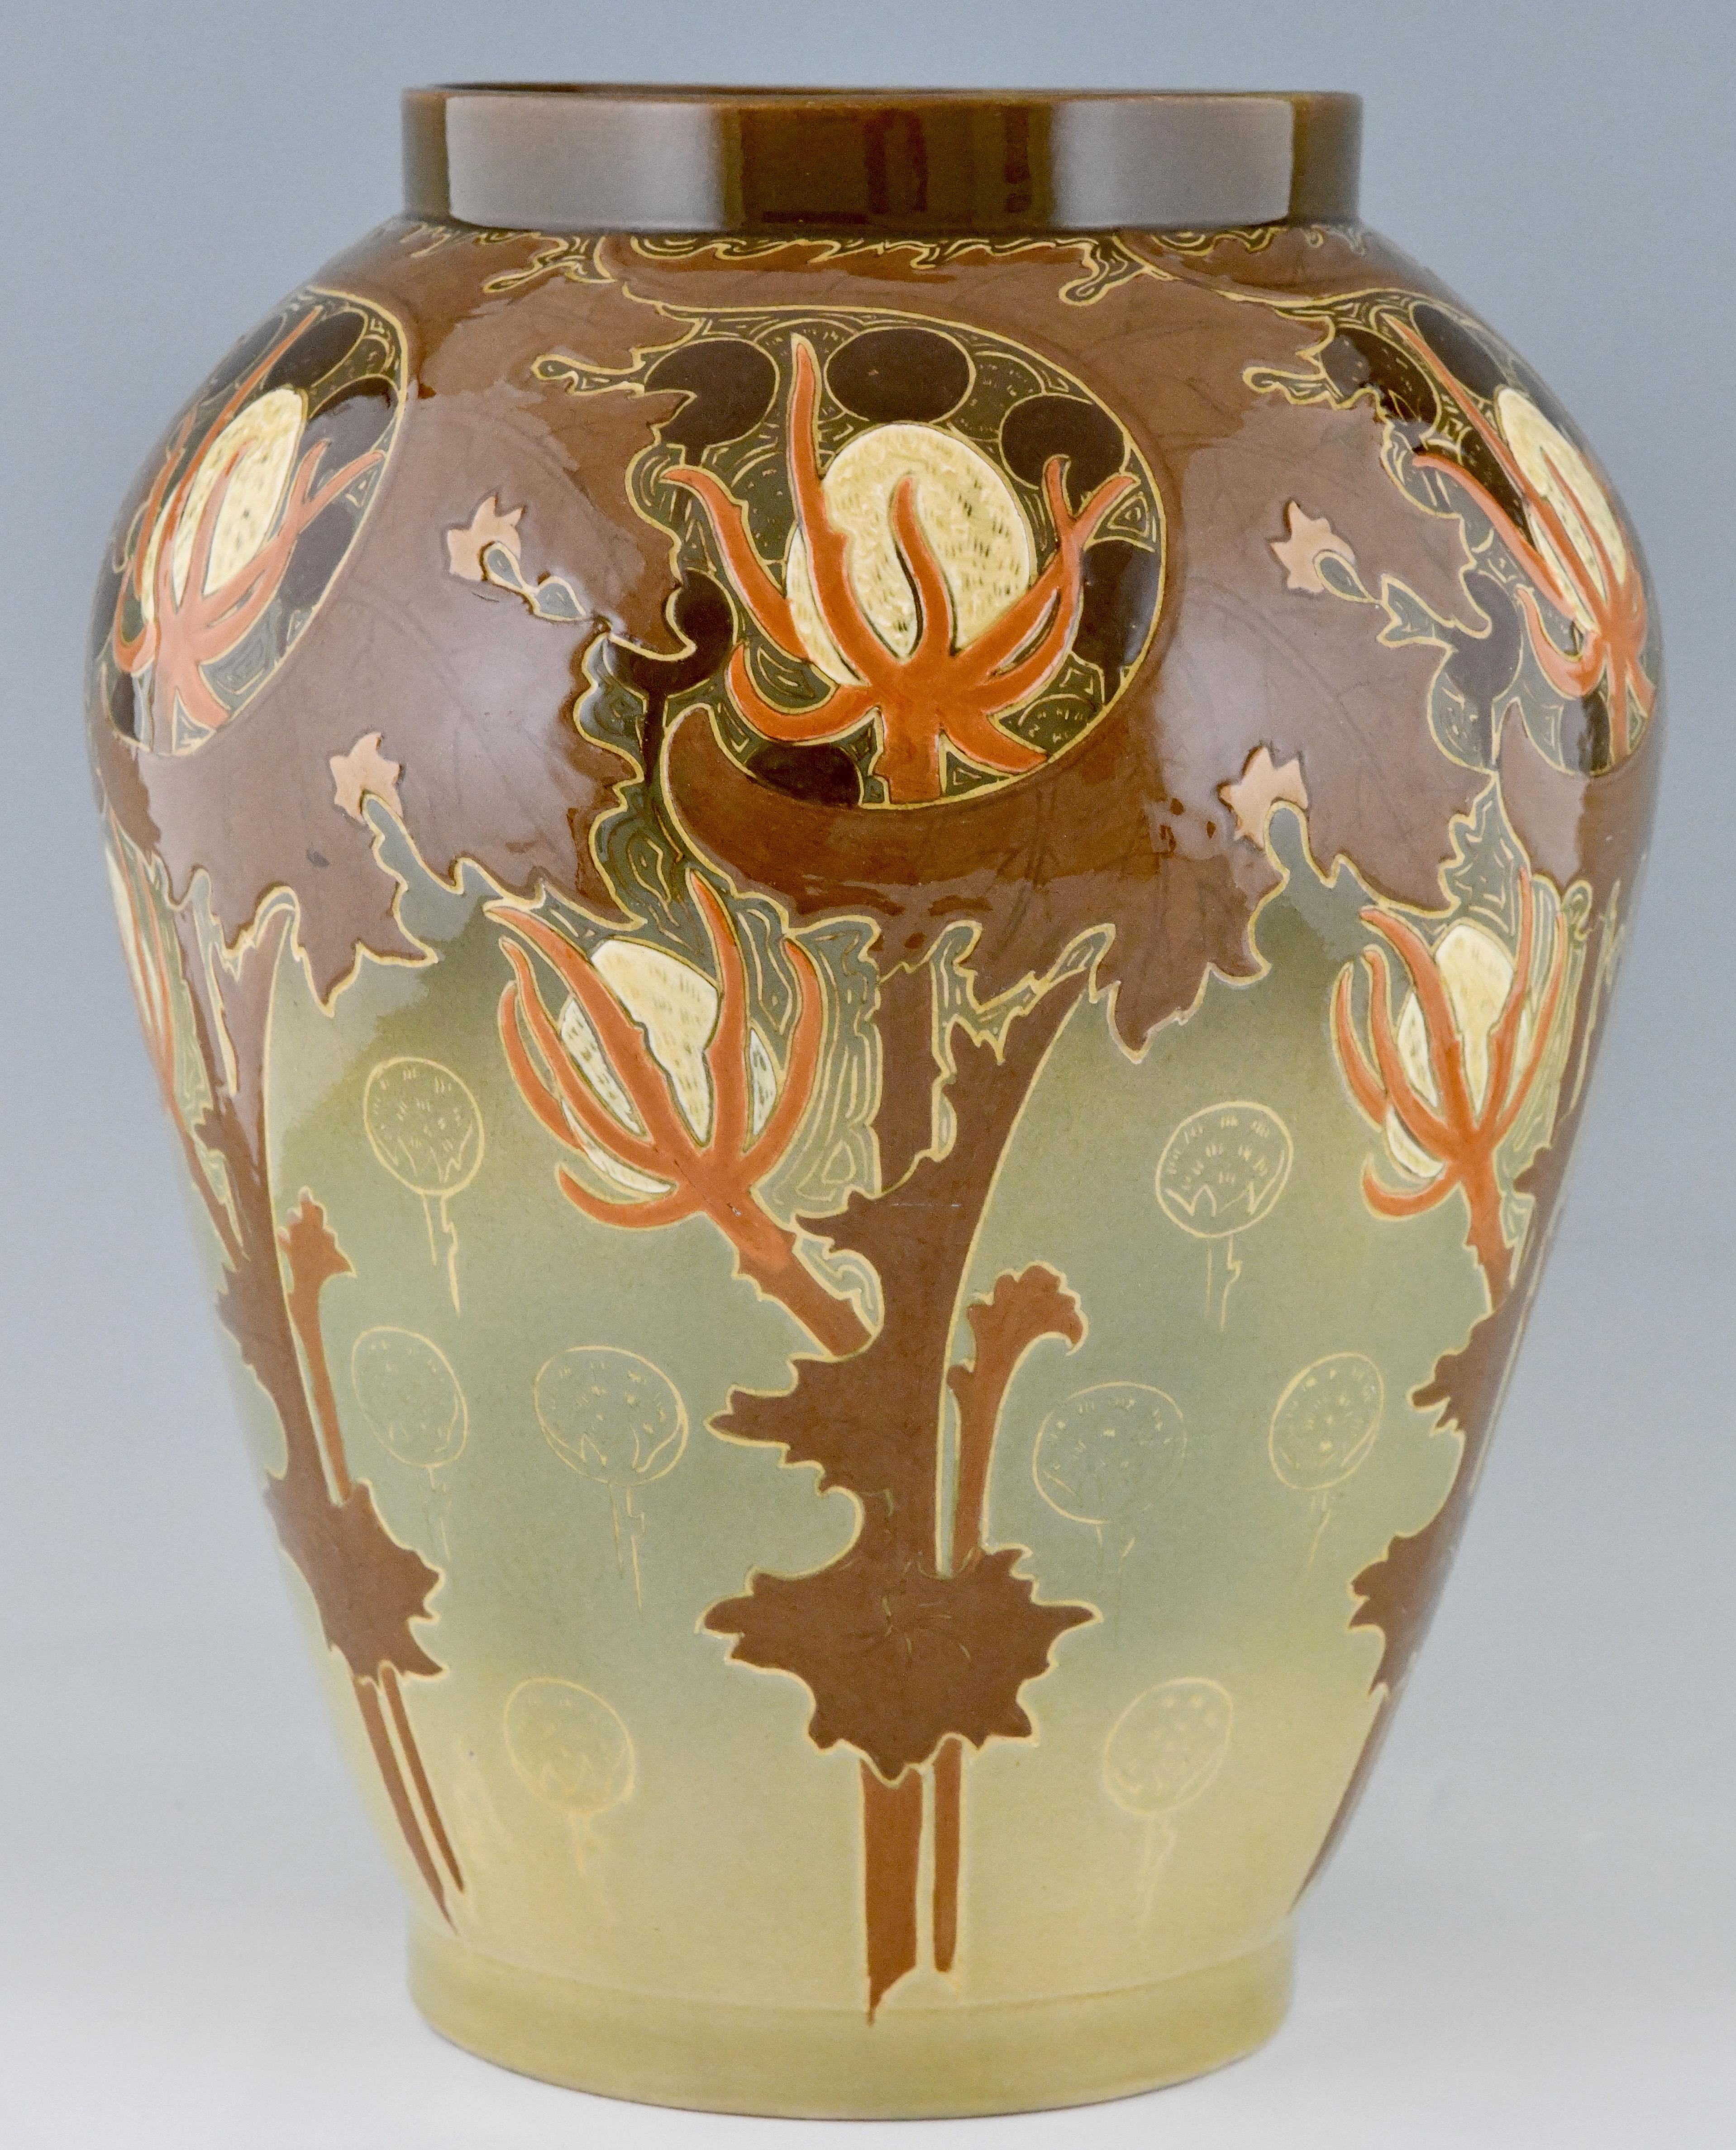 French Impressive Art Nouveau Ceramic Vase with Flowers by Hippolyte Boulenger ca. 1900